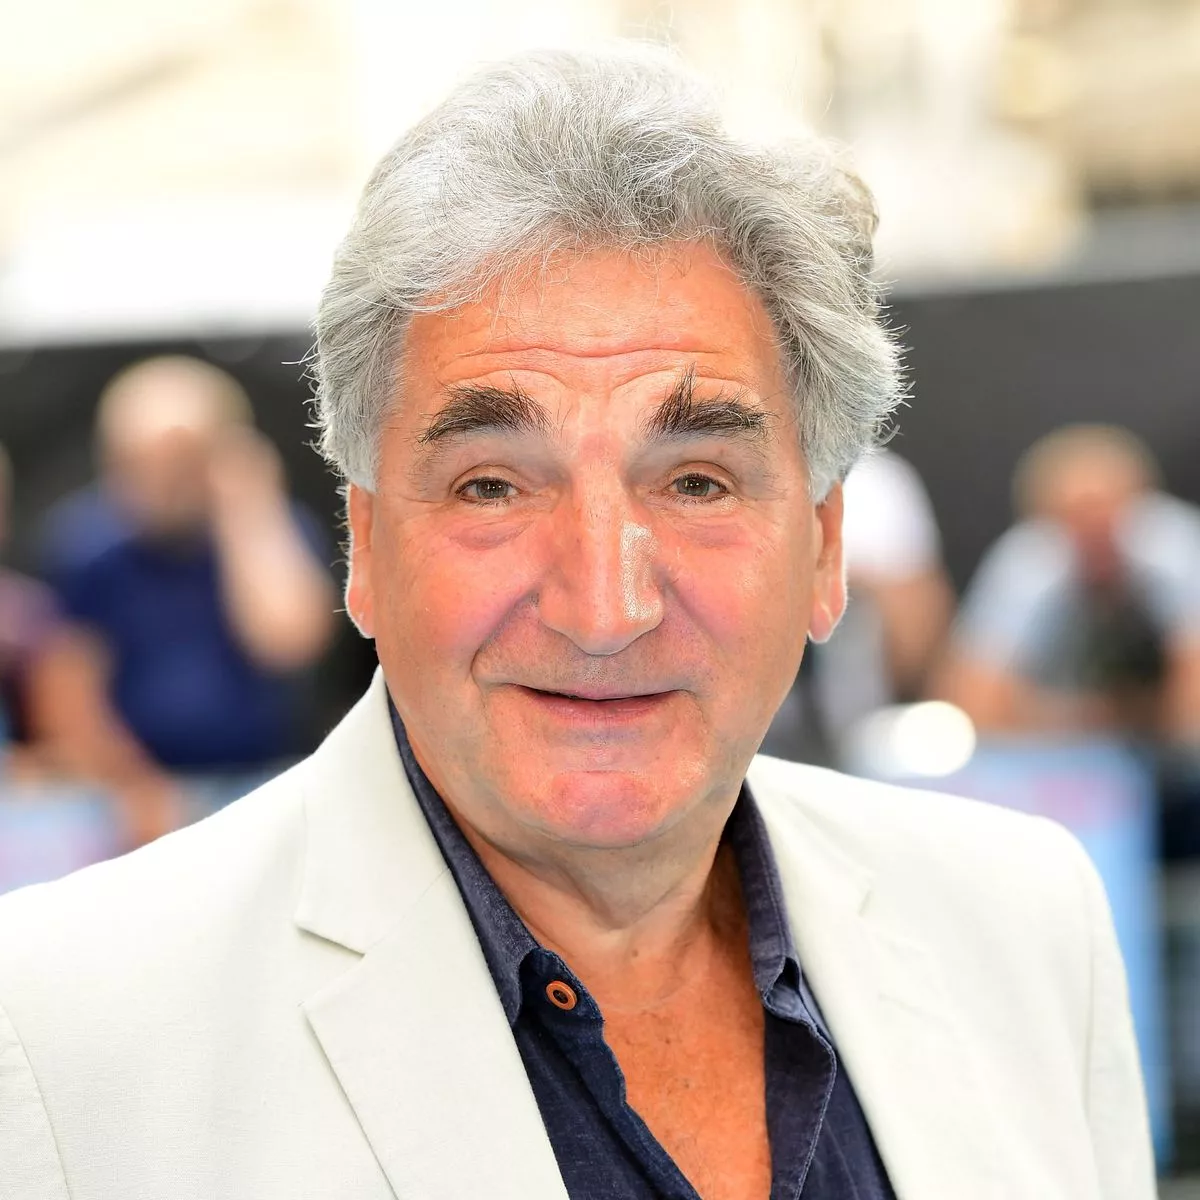 Jim Carter: The Downton Abbey Veteran Actor’s 10 Best Movies & TV Shows